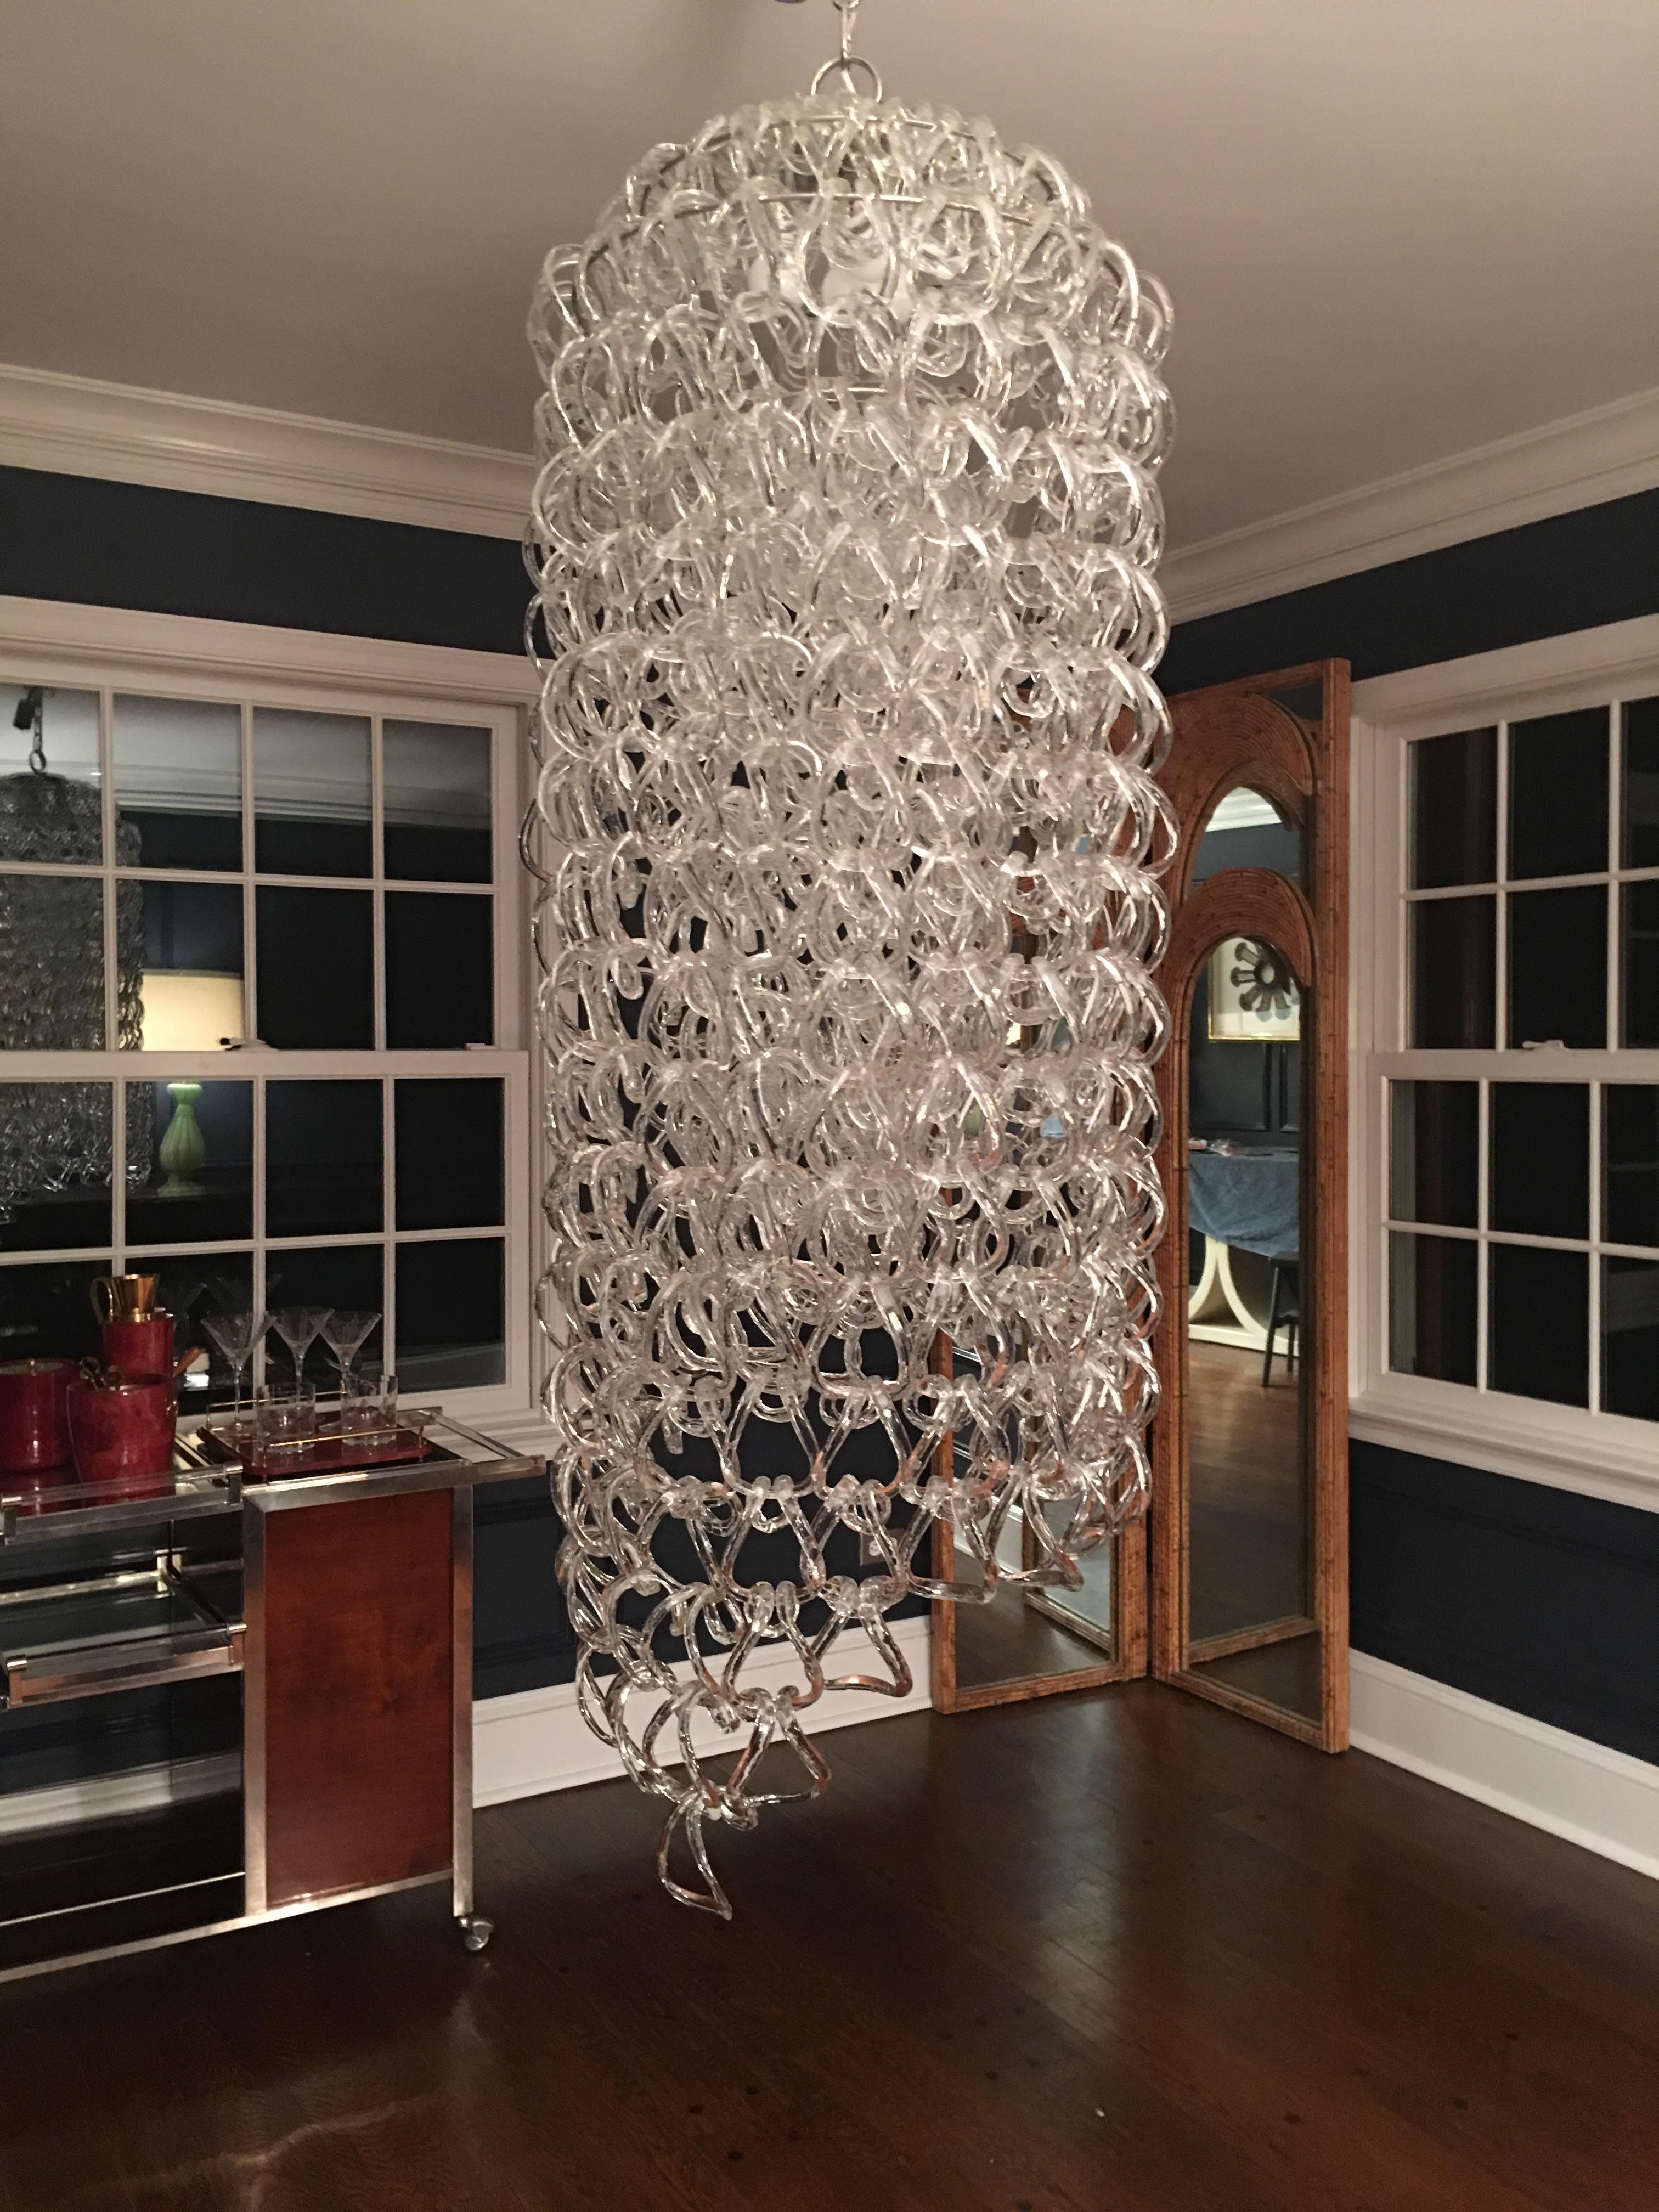 Original large Angelo Mangiarotti for Vistosi 'Giogali' chandelier circa 1970 made with over 400 Murano handmade glass links in double horseshoe rings, suspended by tiered metal frame, Italy, c. 1970.  Truly elegant design of cascading links that